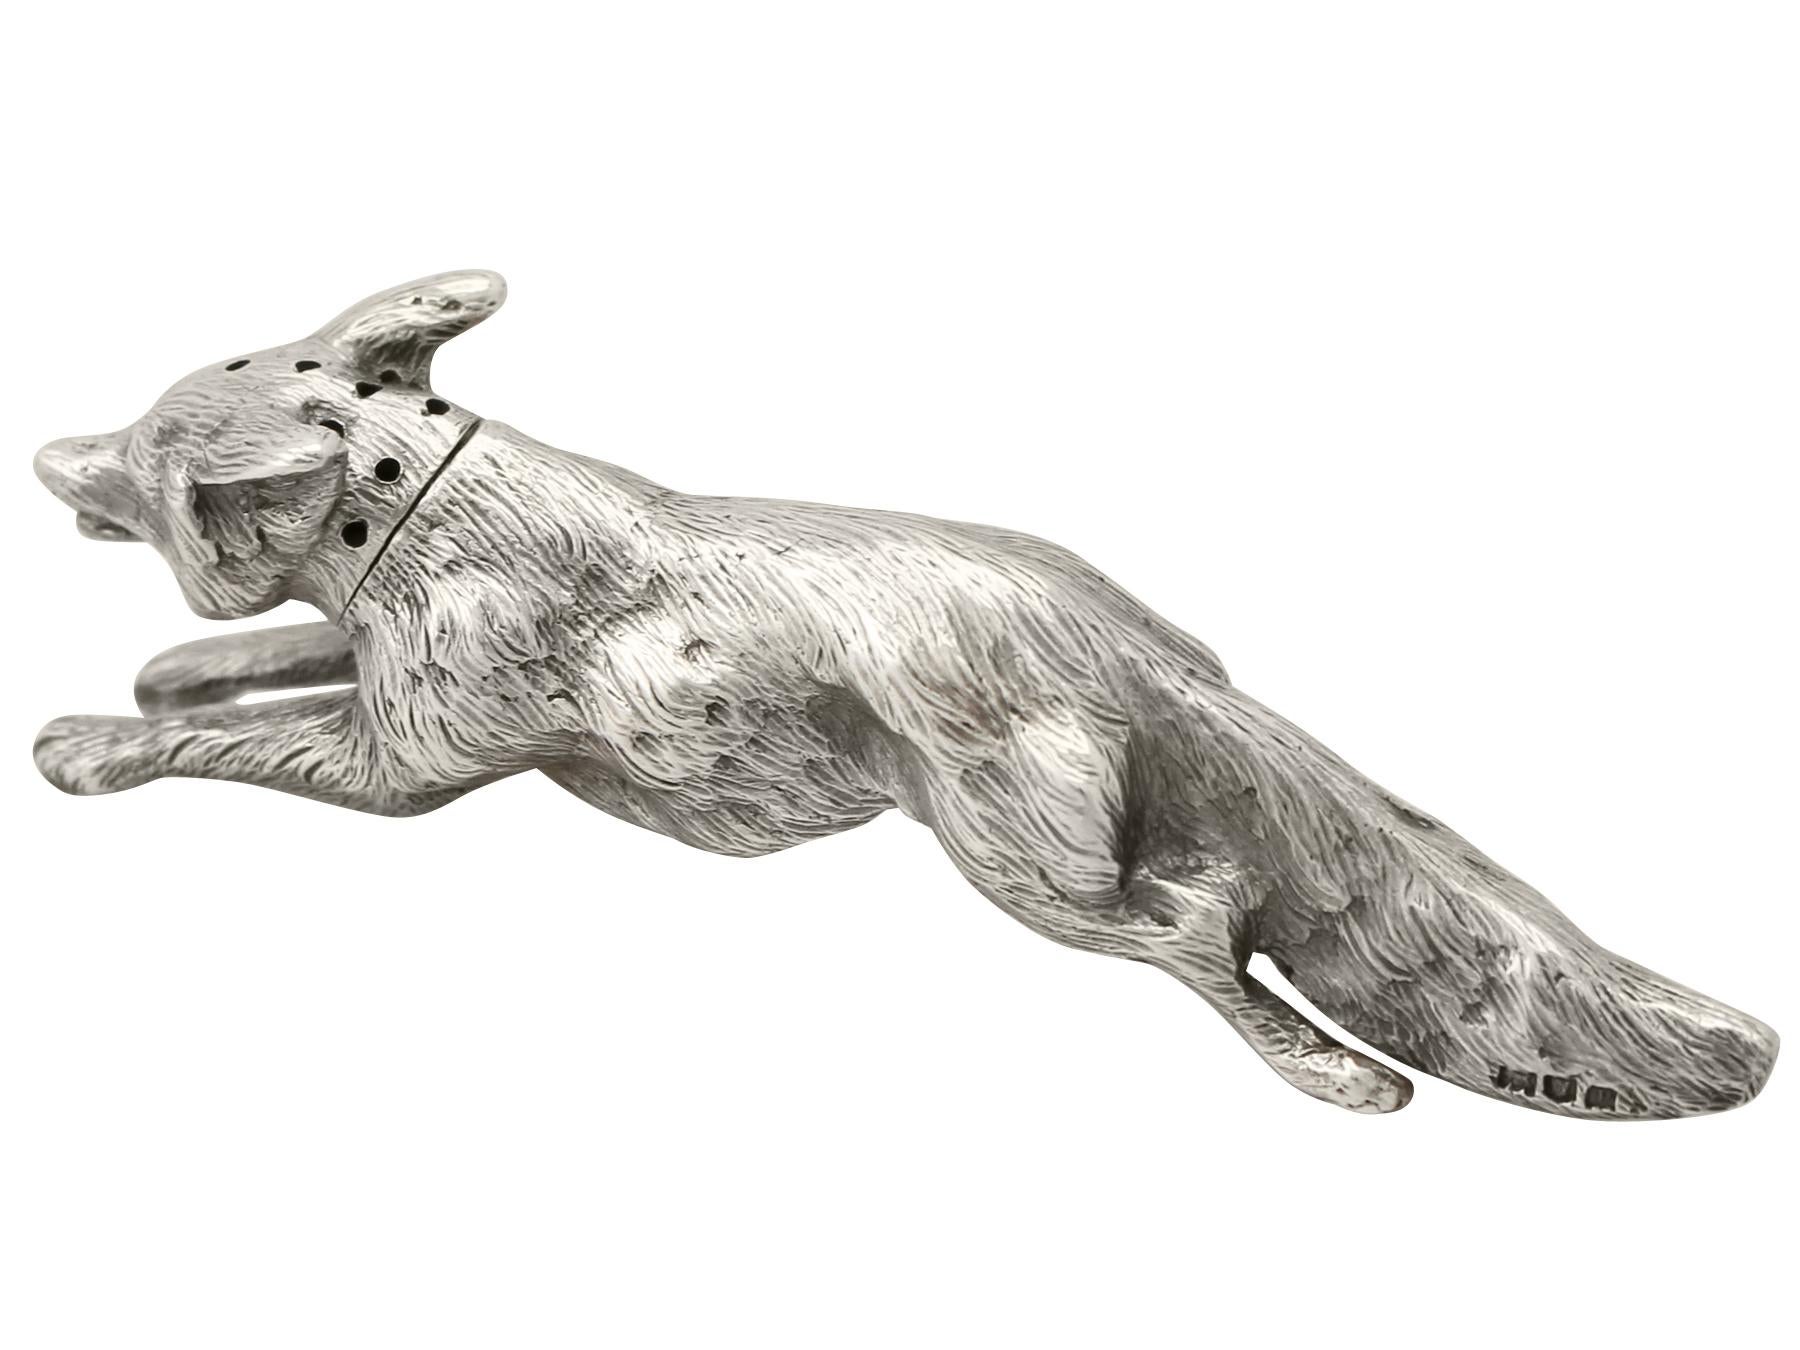 An exceptional, fine and impressive antique George V English cast sterling silver pepperette in the form of a fox; an addition to our animal related silverware collection.

This exceptional antique George V cast sterling silver pepperette has been